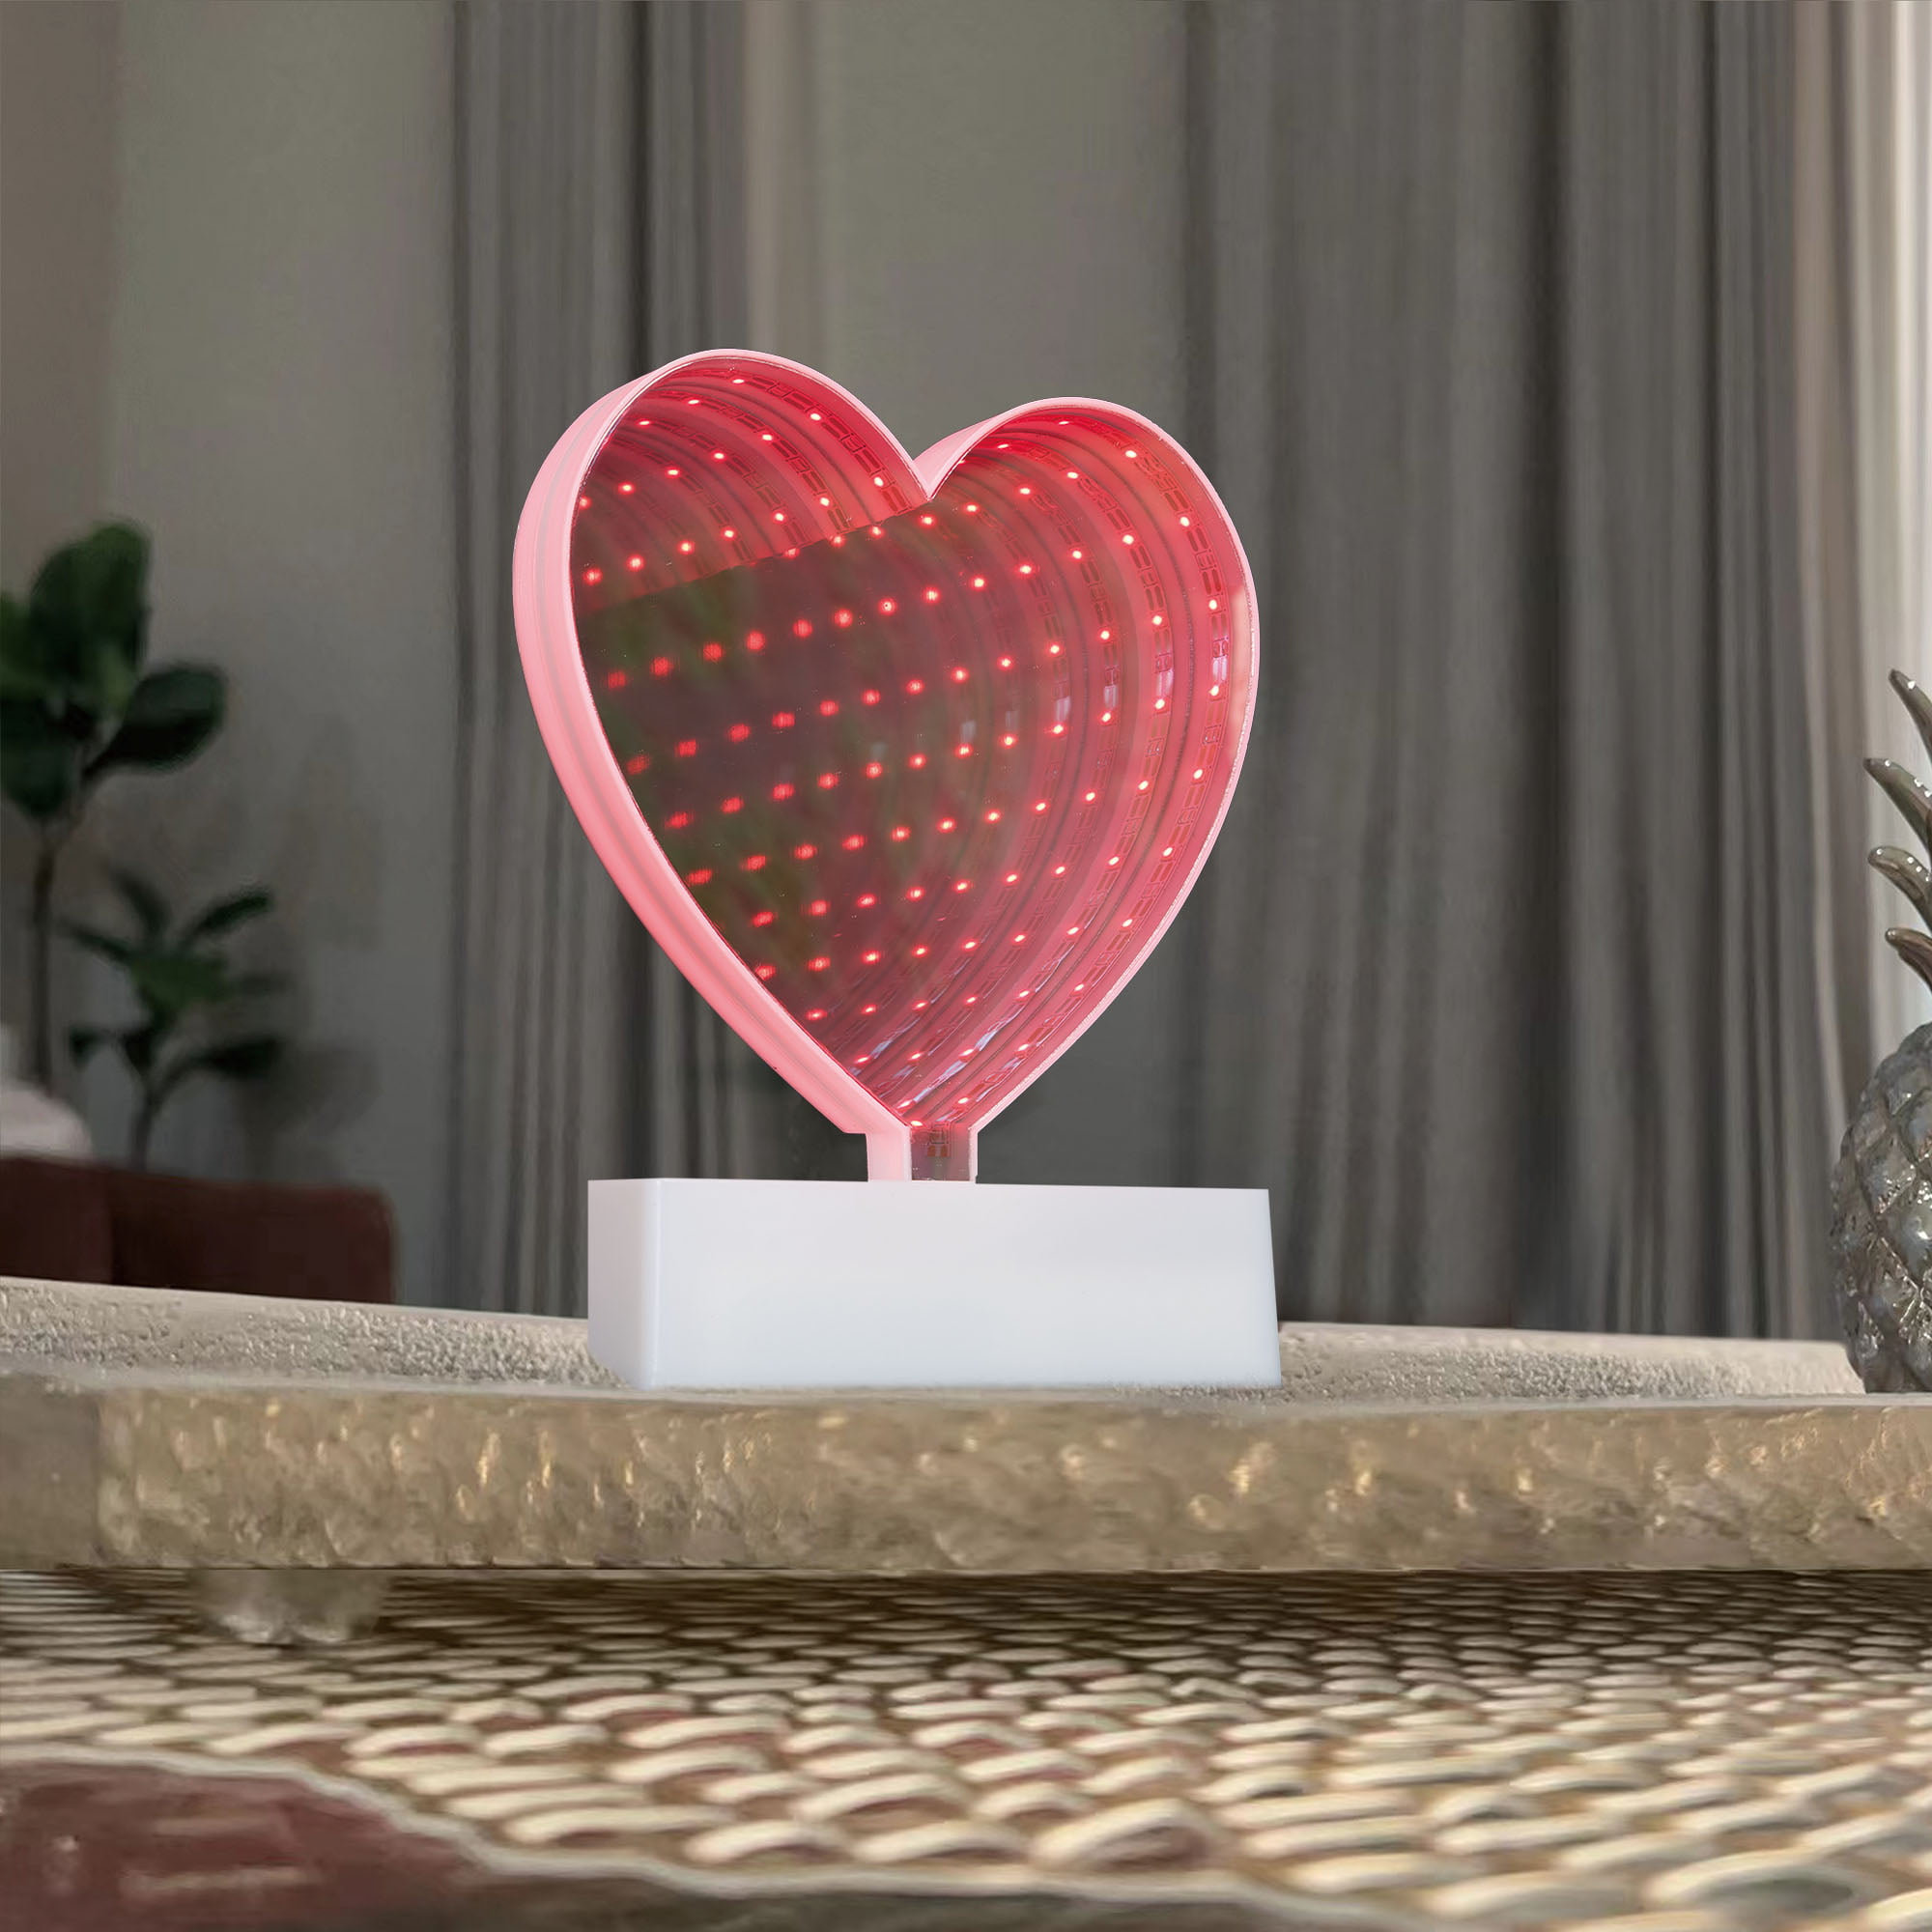 EZ-Illuminations Battery Operated LED Infinity Lighted Heart with Timer